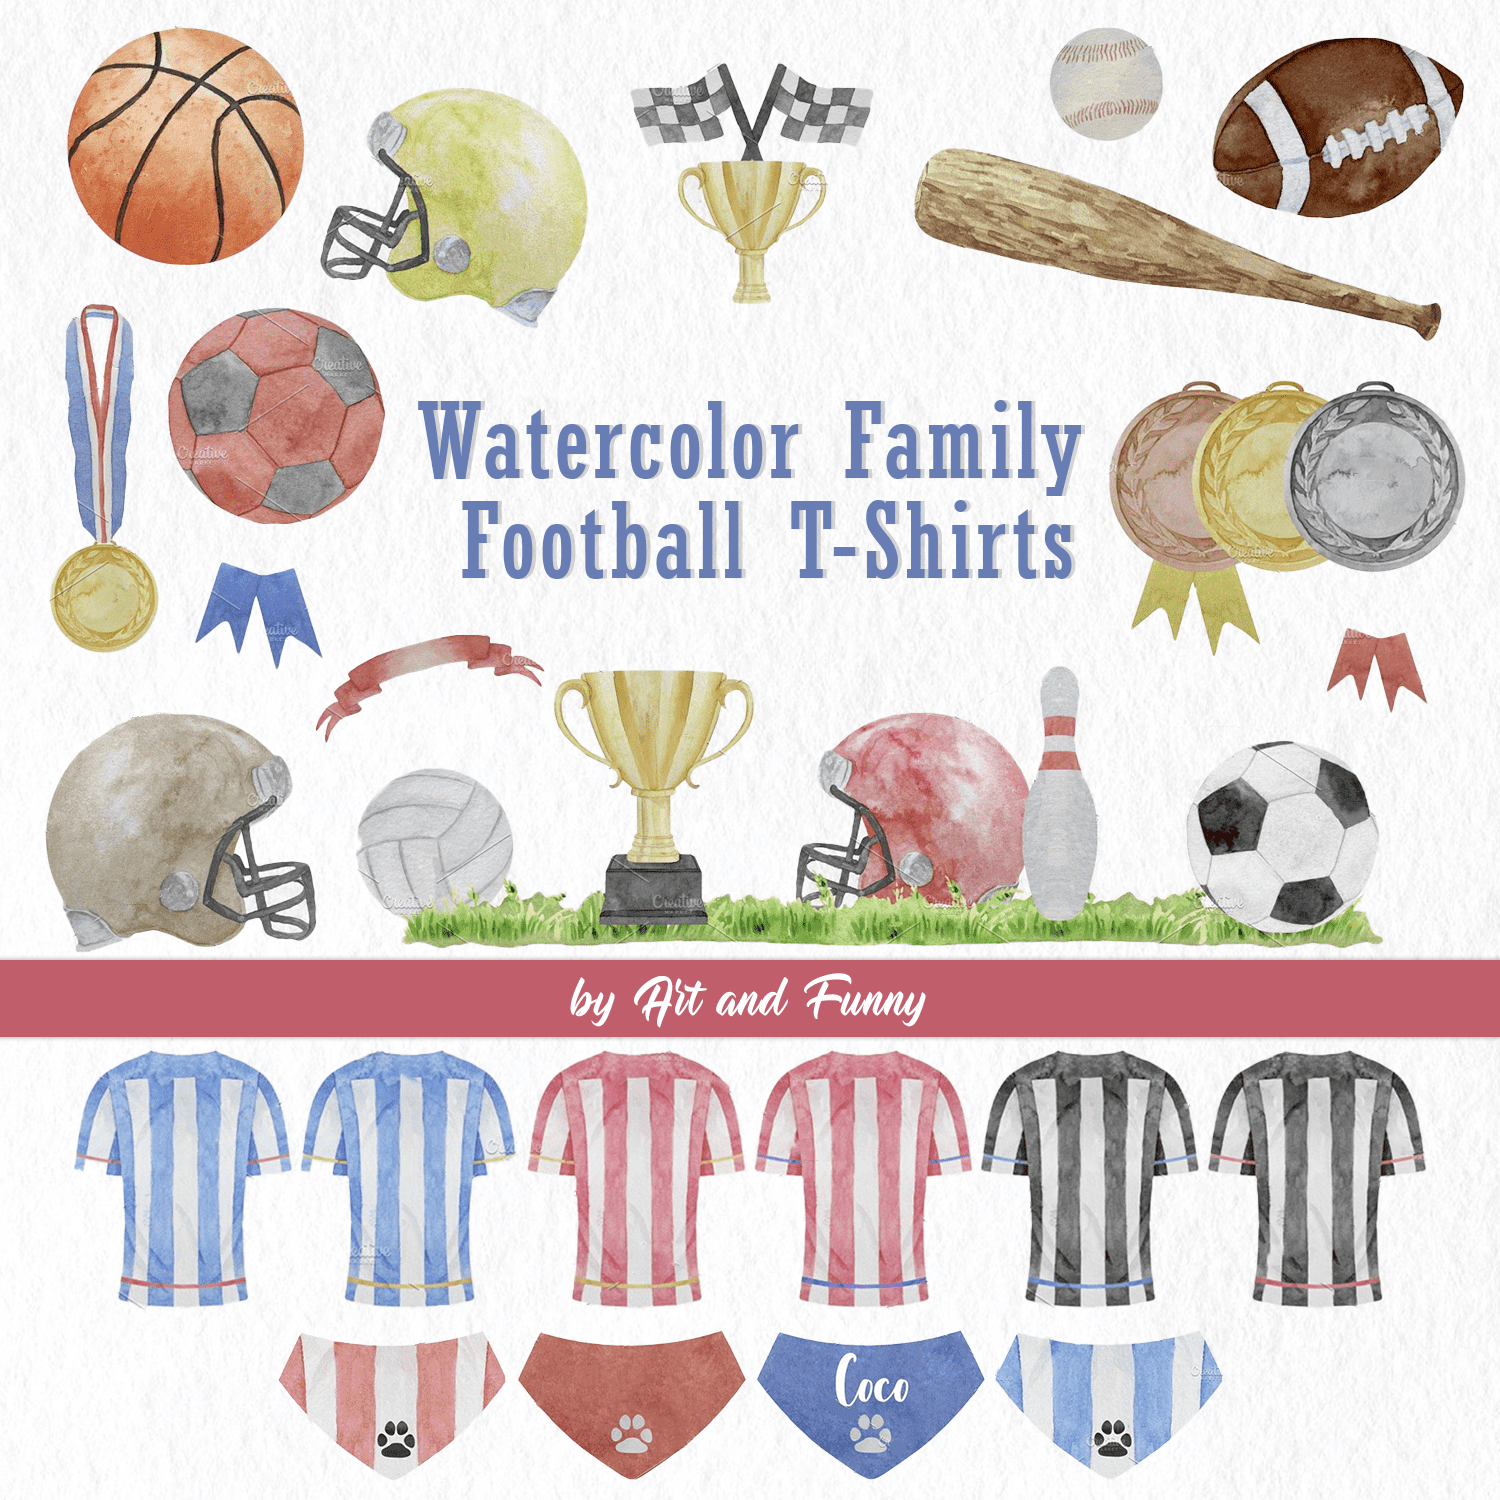 Watercolor Family Football T-Shirts cover.